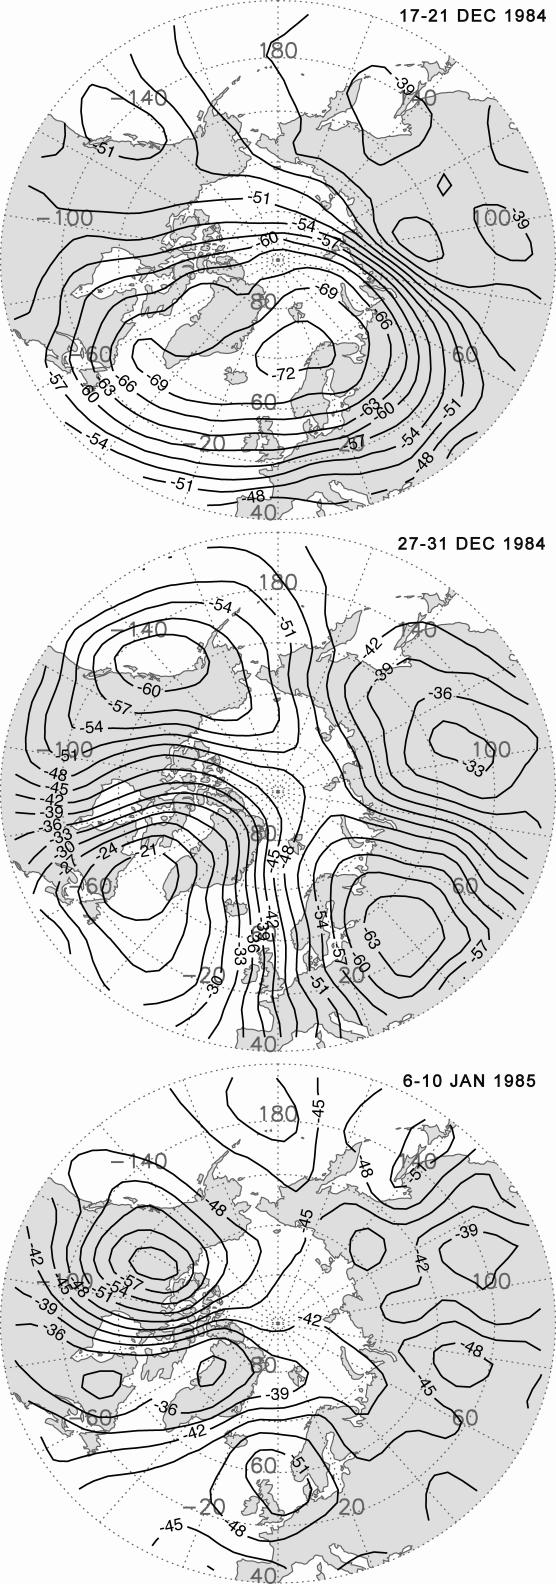 Sudden stratospheric warmings The change of 10 hpa temperatures ( o C) associated with a sudden stratospheric warming event that occurred during late December 1984 through early January 1985.